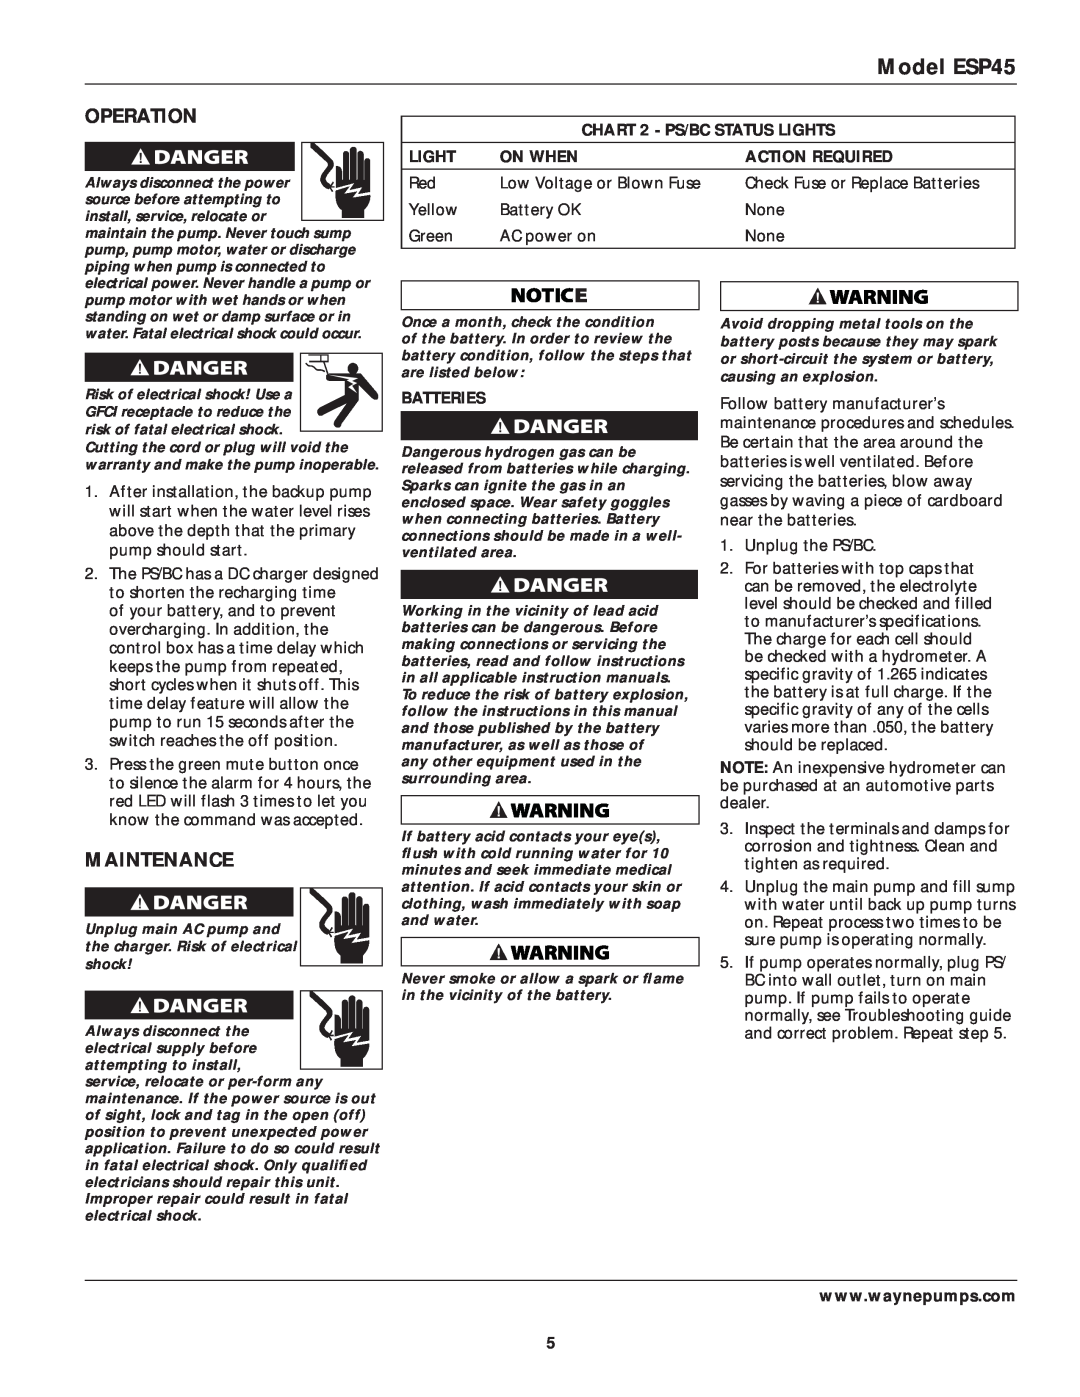 Wayne Operation, Maintenance, CHART 2 - PS/BC STATUS LIGHTS, Light, On When, Action Required, Batteries, Model ESP45 